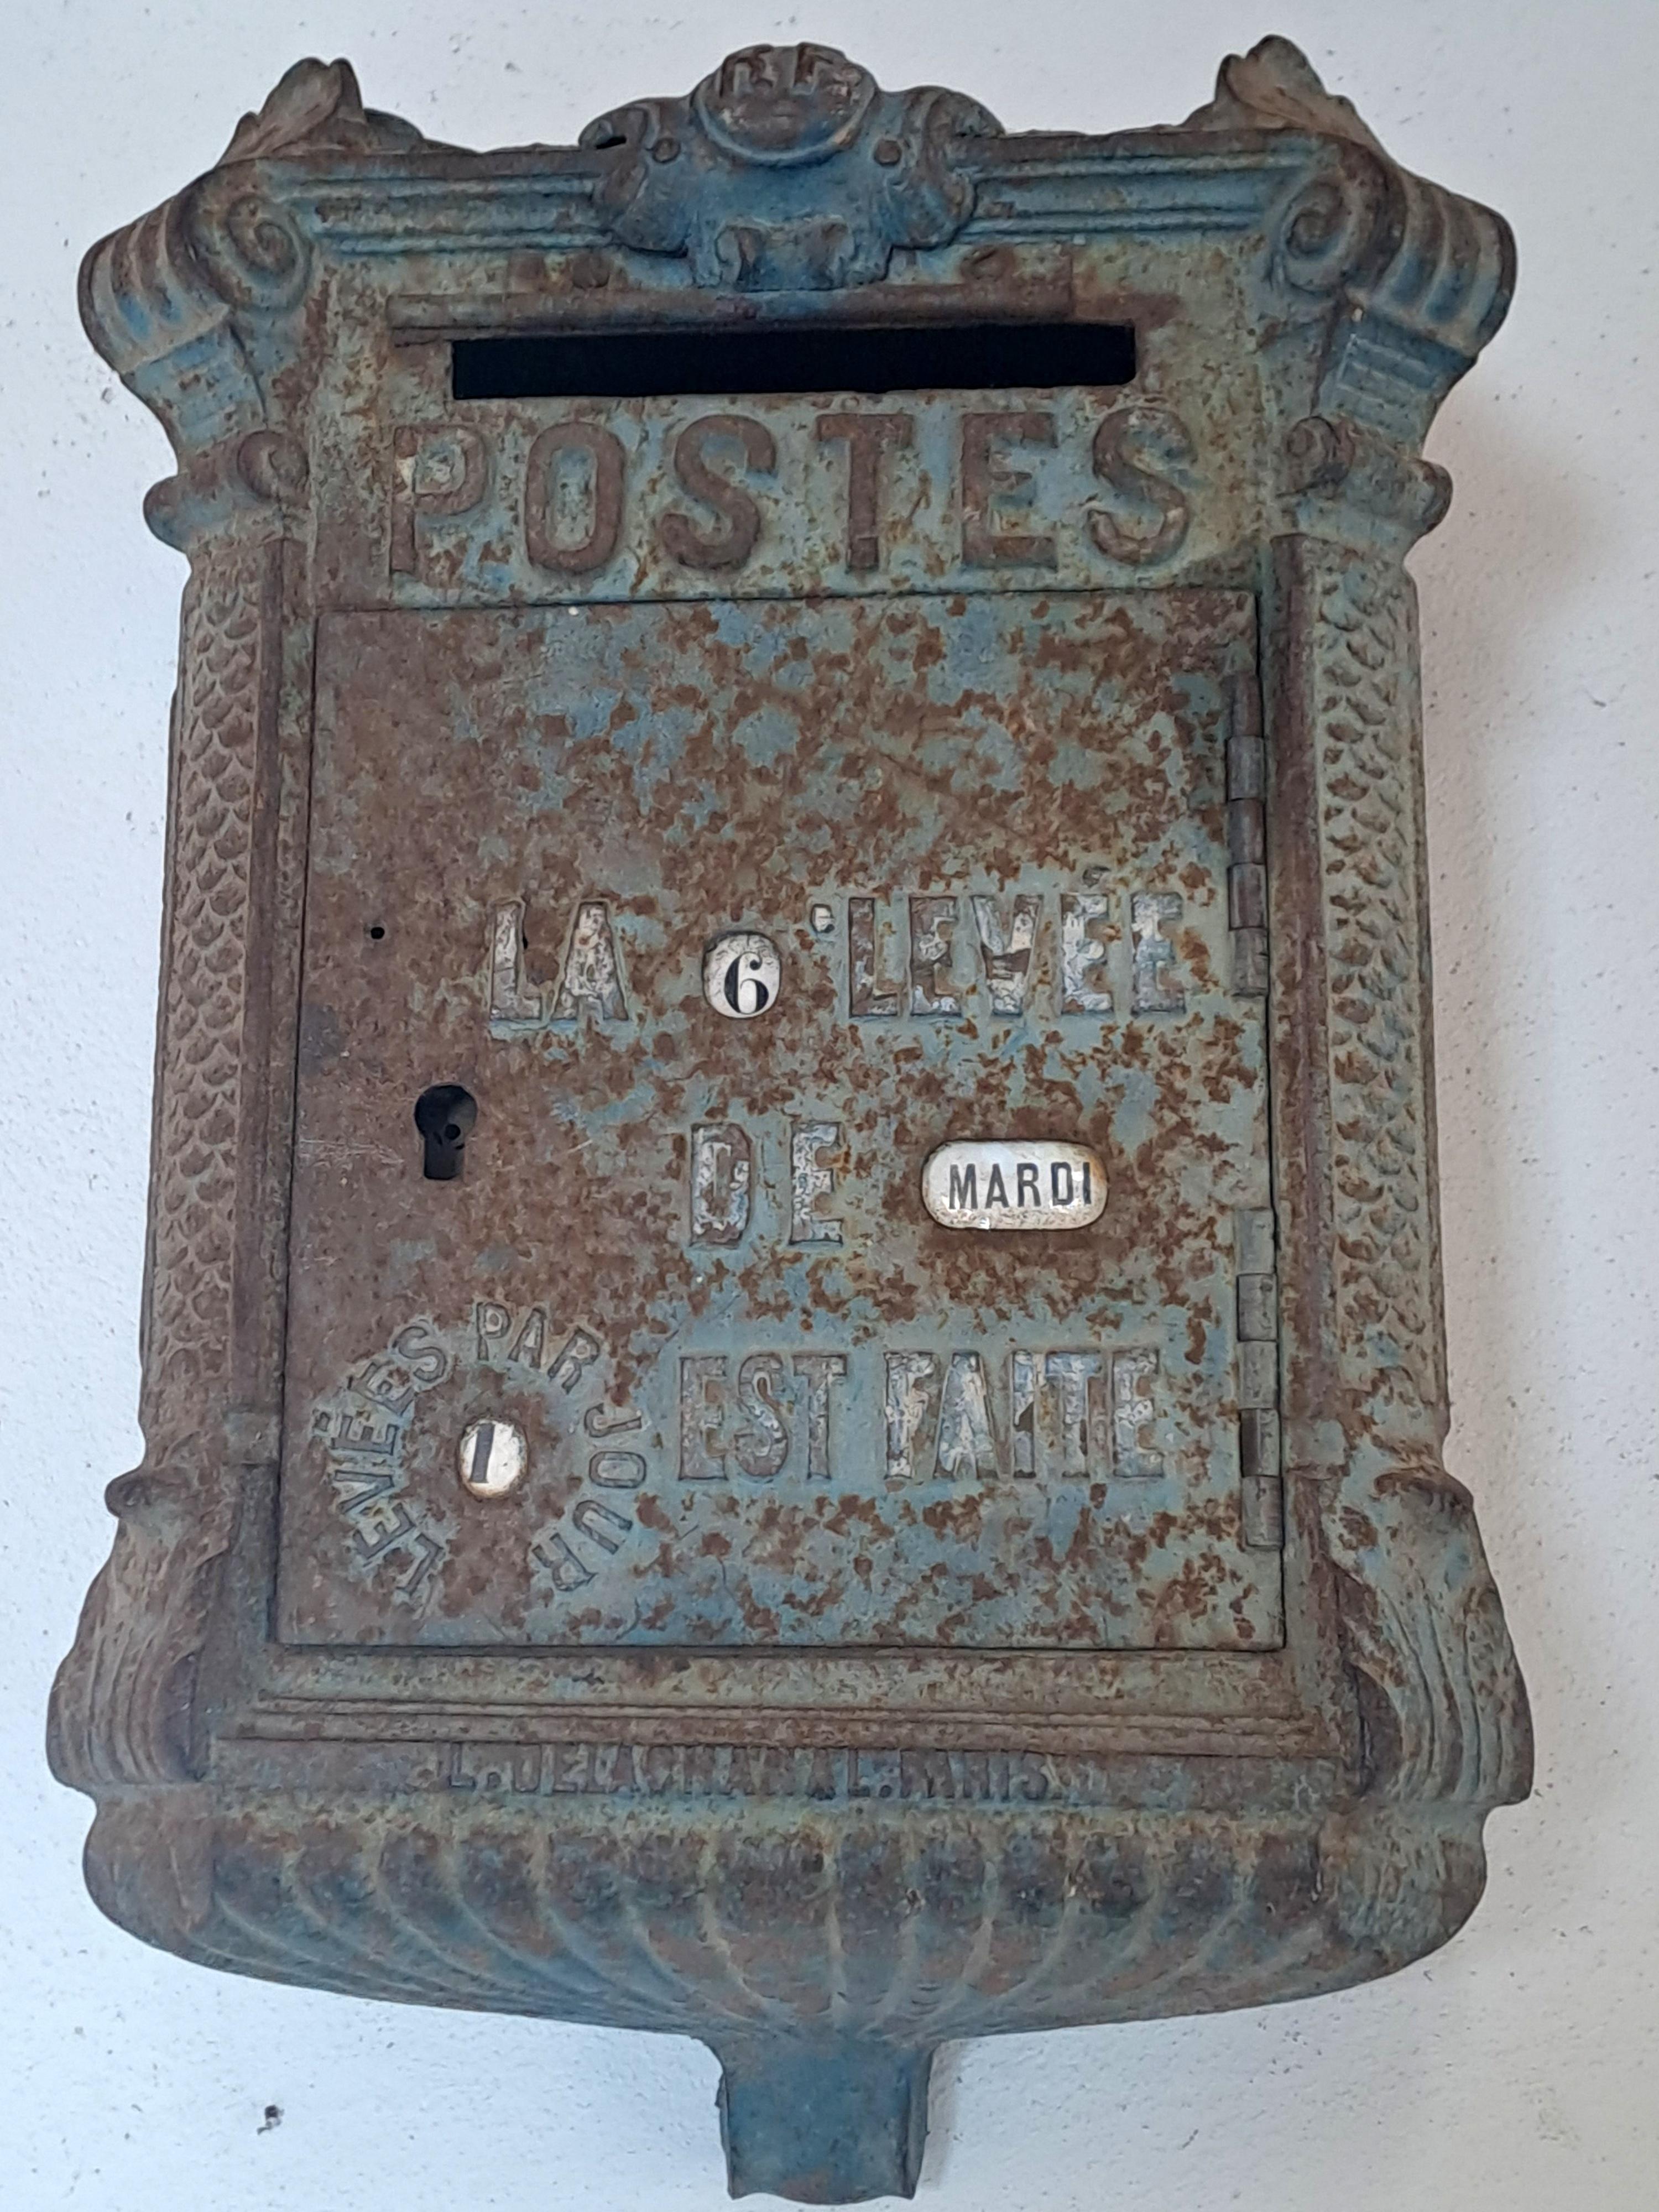 Art Nouveau French Post Office Mailbox - Cast Iron - Delachanal Model - Late 19th Century For Sale